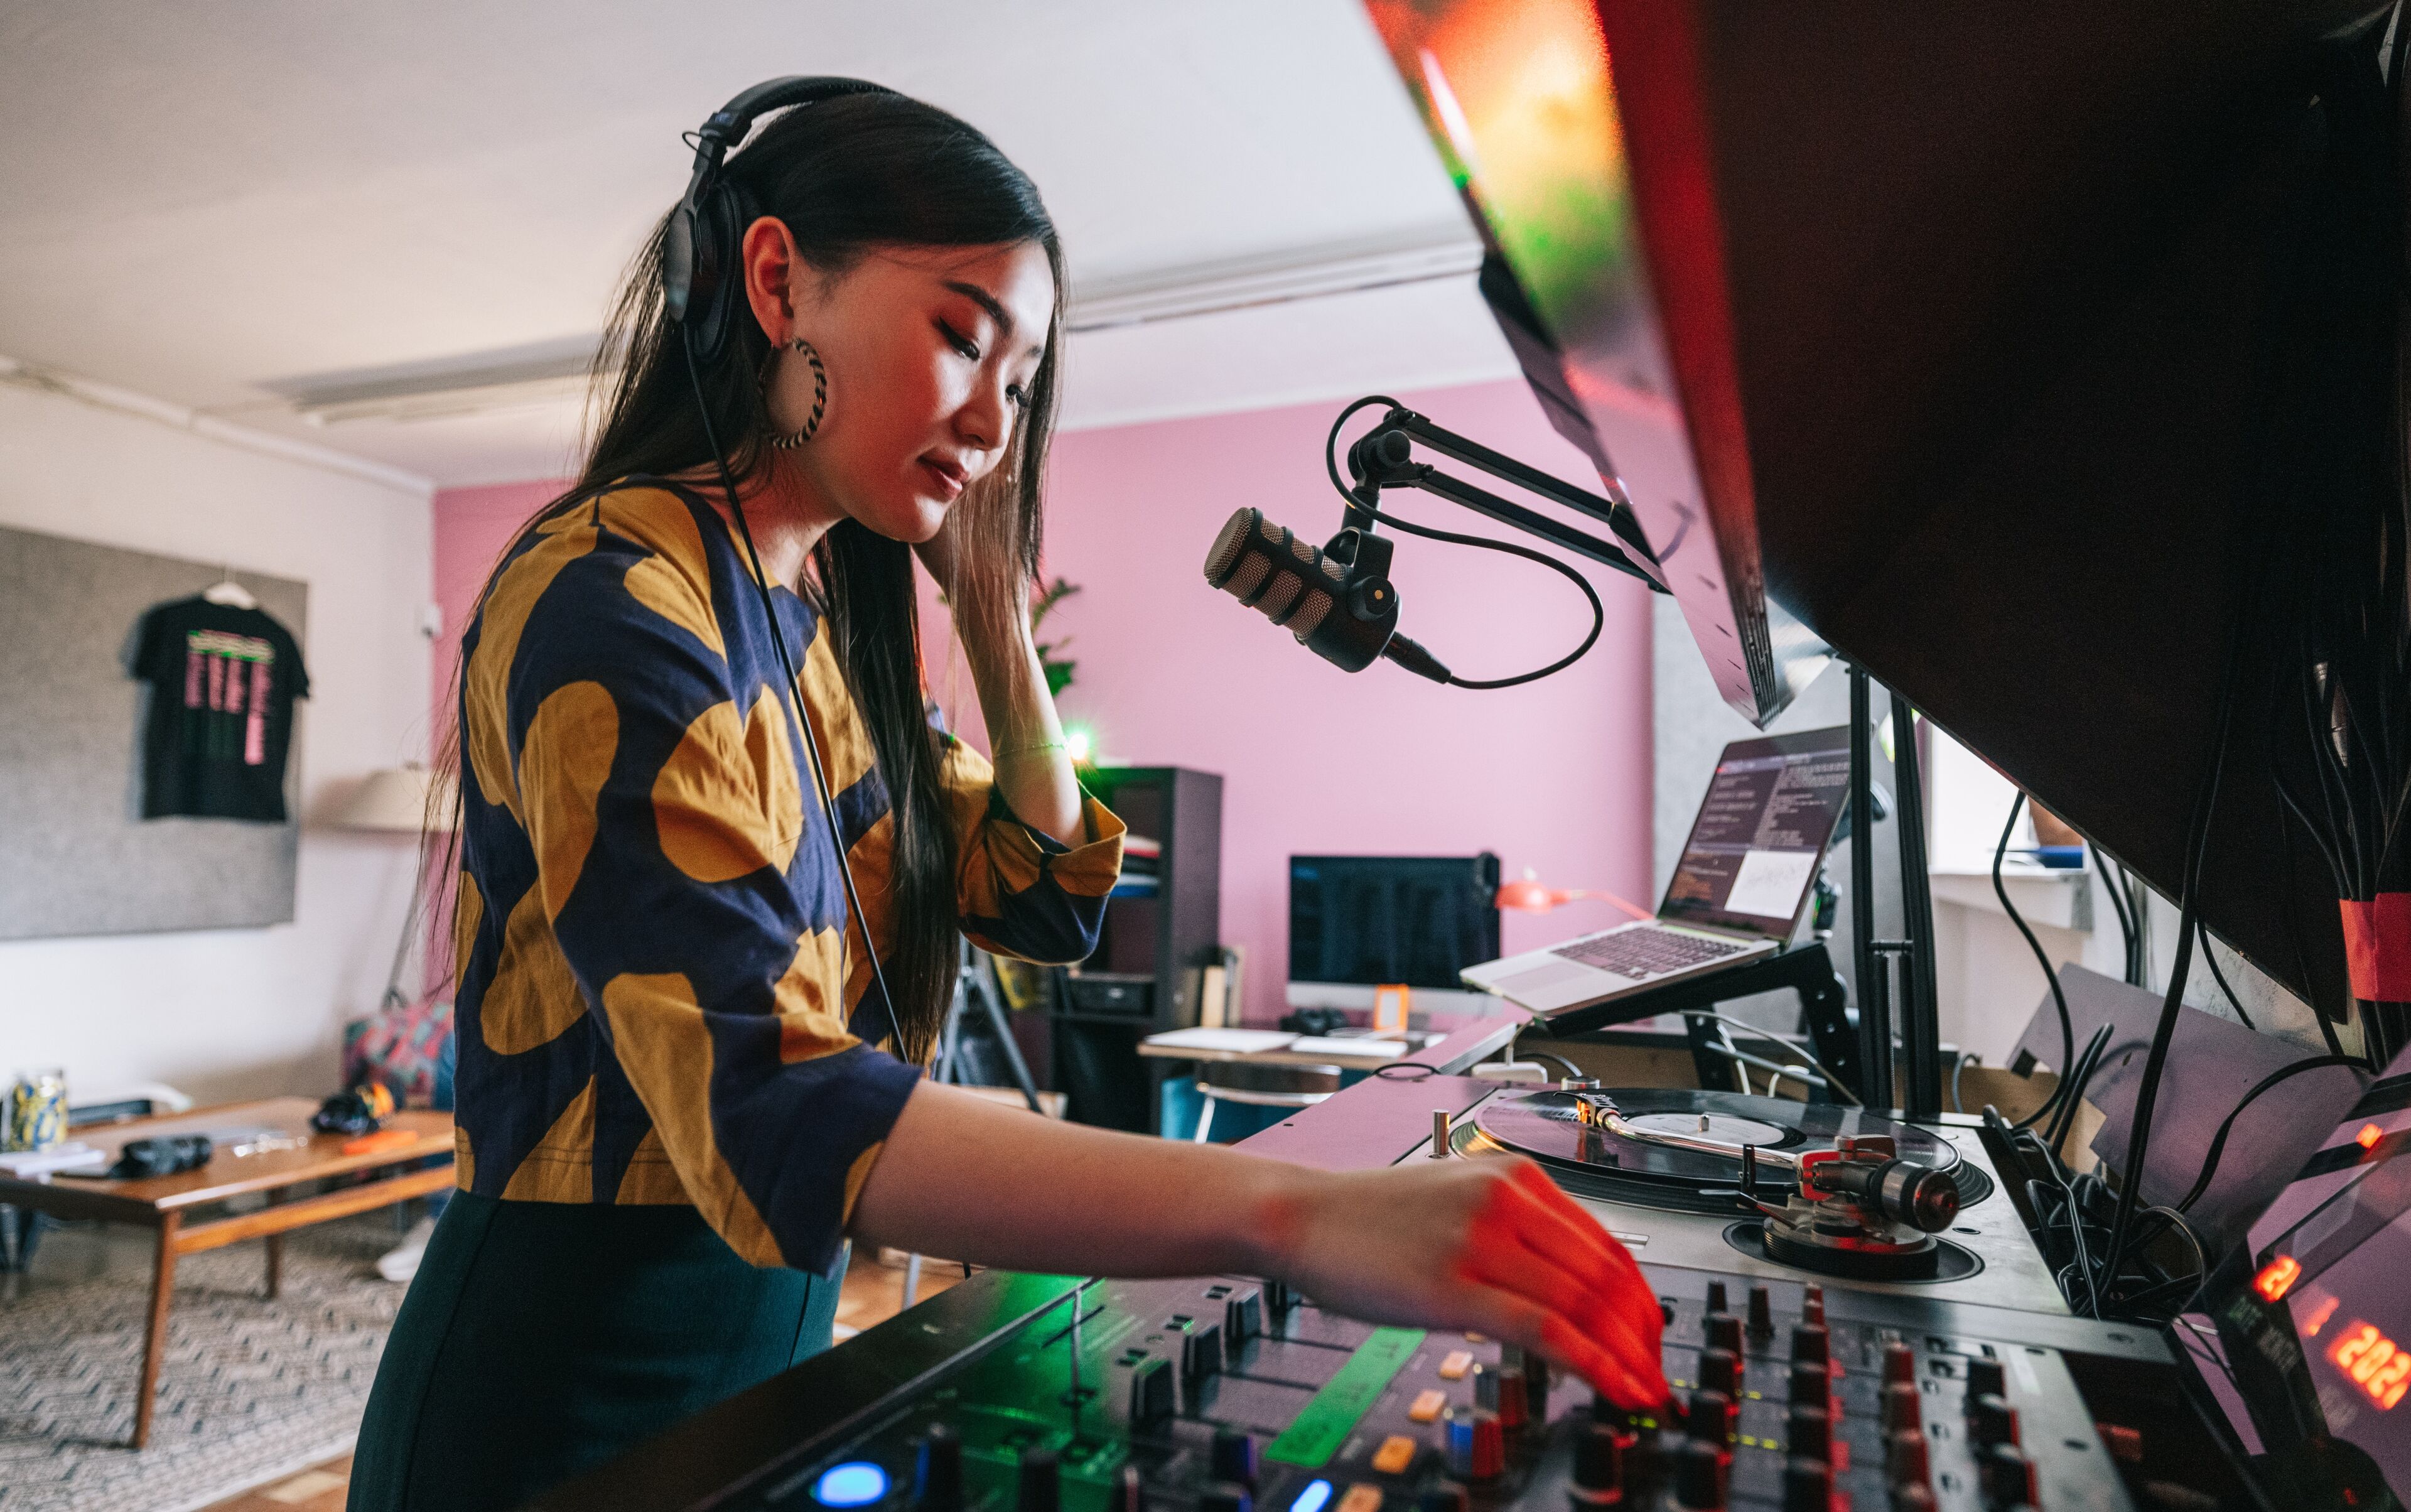 A focused female DJ with headphones is mixing tracks on a professional audio mixer in her vibrant home studio setup.